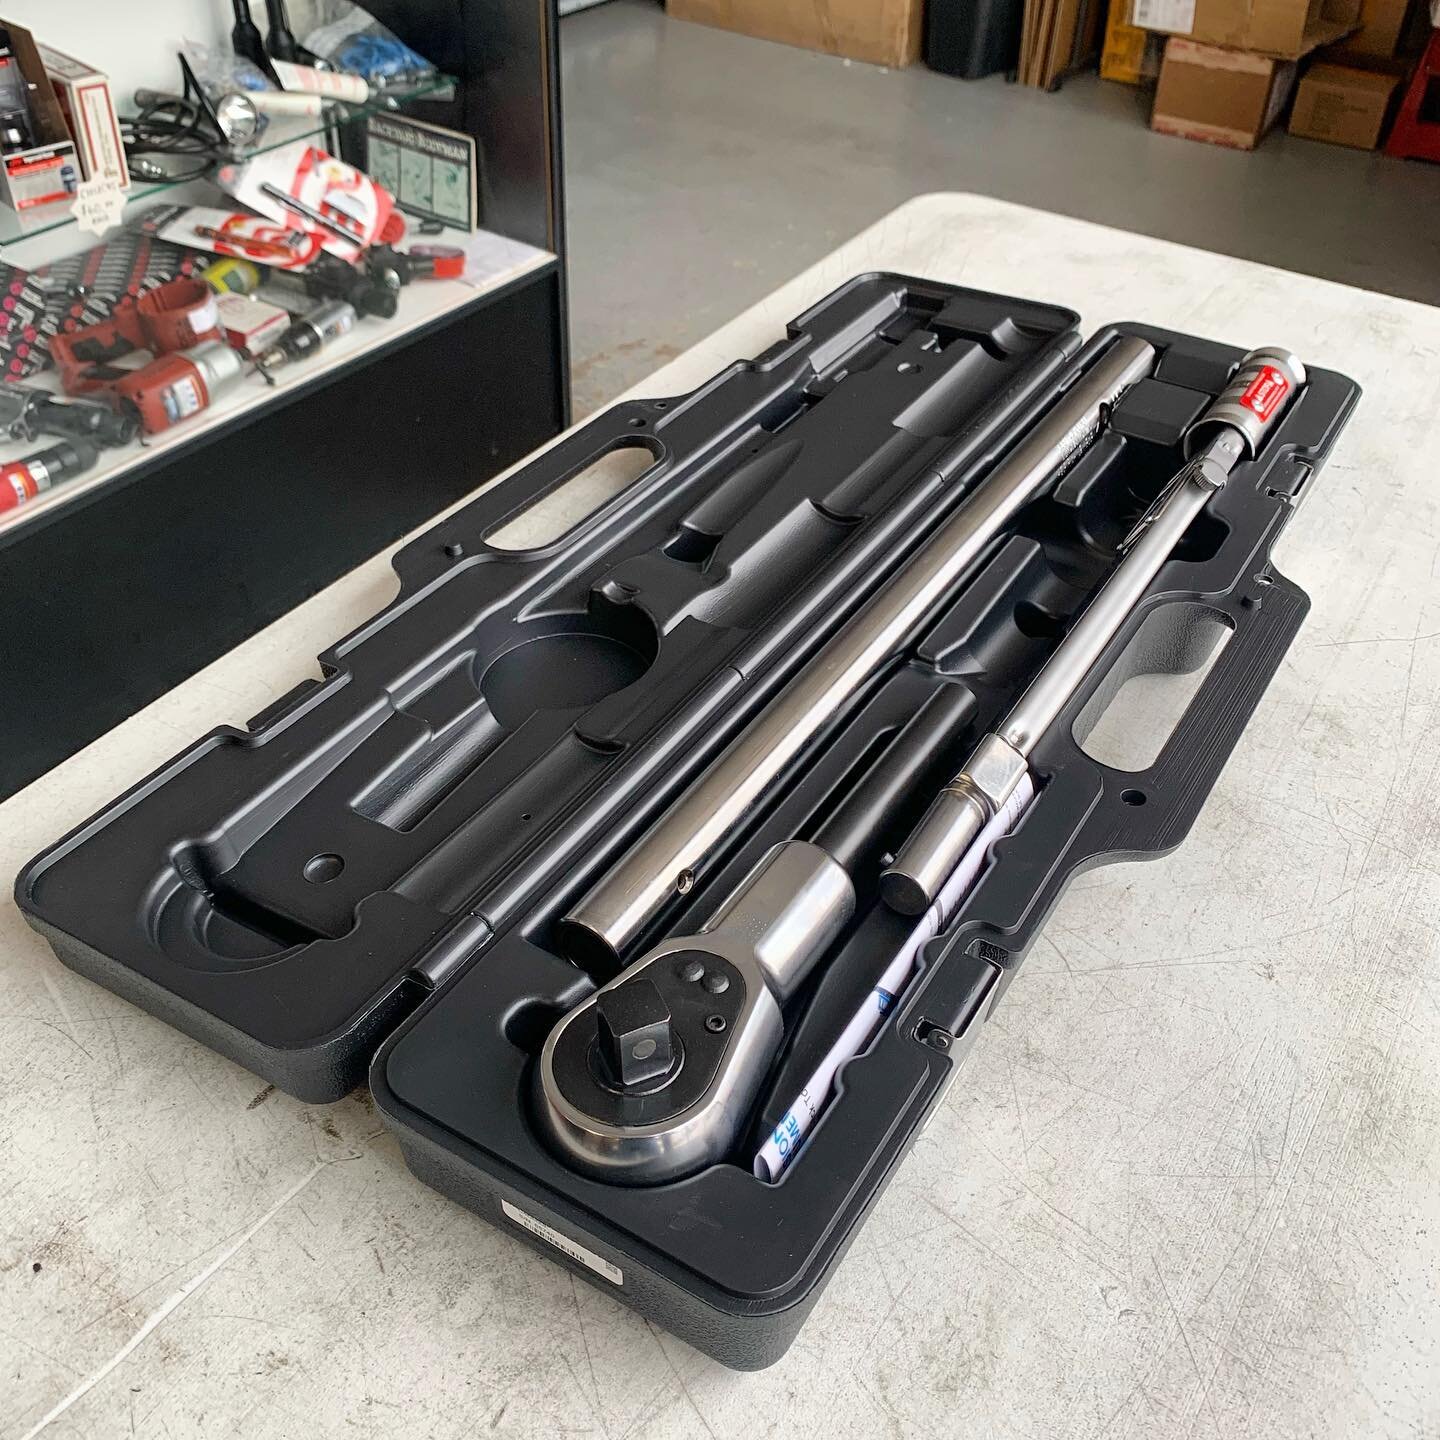 Maximize the power of your torque wrench with proper maintenance! 🔧💪 Learn the importance of repair, calibration, and certification in our latest blog post. Don't miss out on ensuring accuracy, efficiency, and safety on the job. Click the link in o